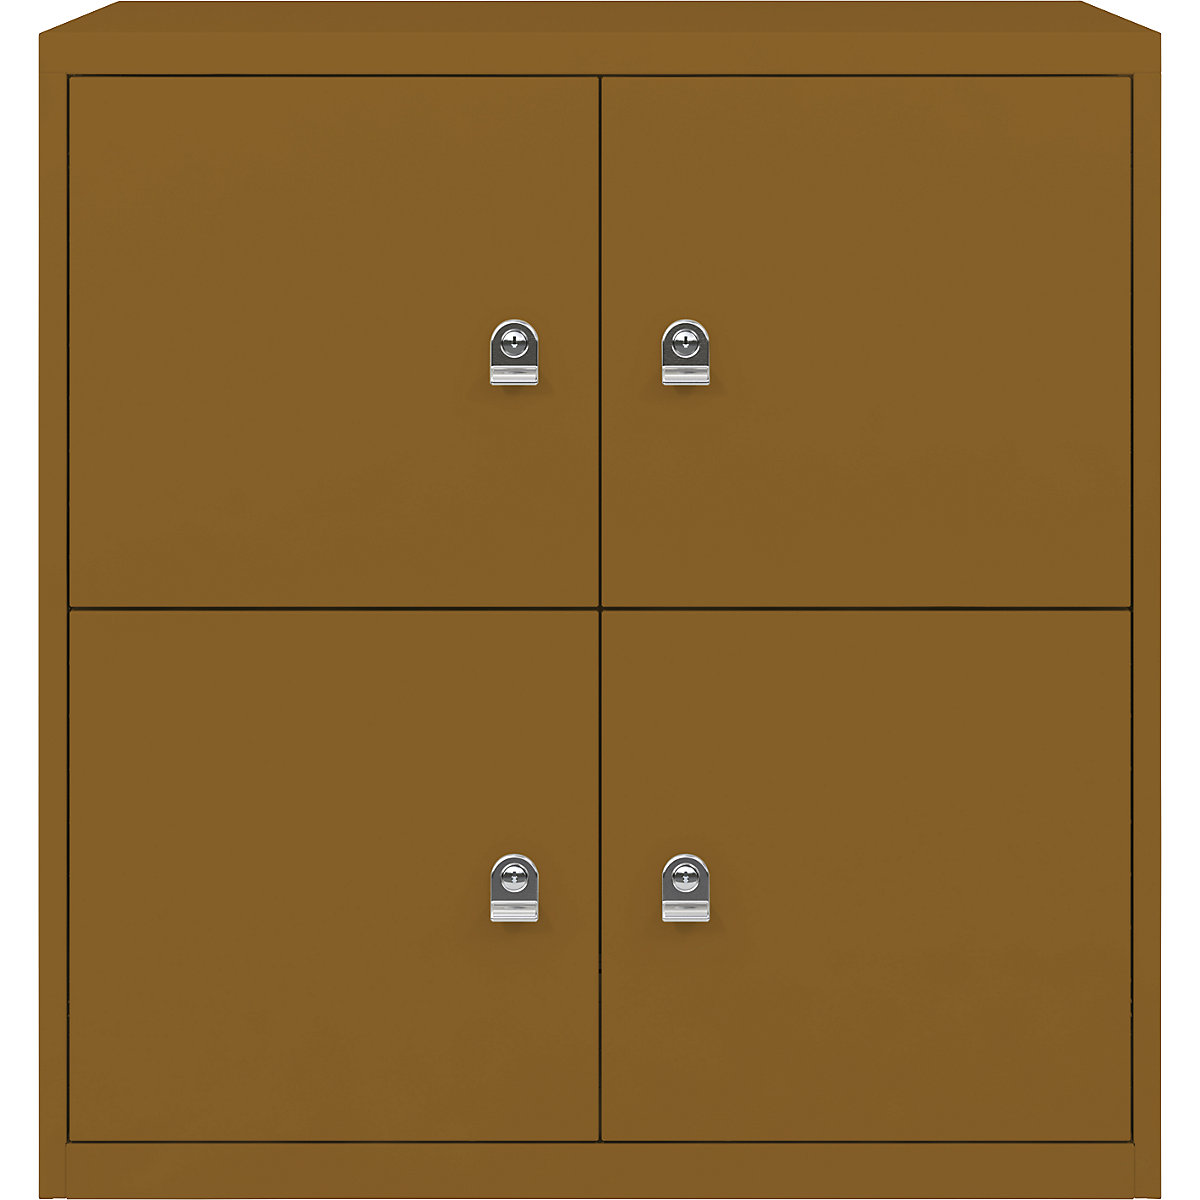 BISLEY – LateralFile™ lodge, with 4 lockable compartments, height 375 mm each, dijon